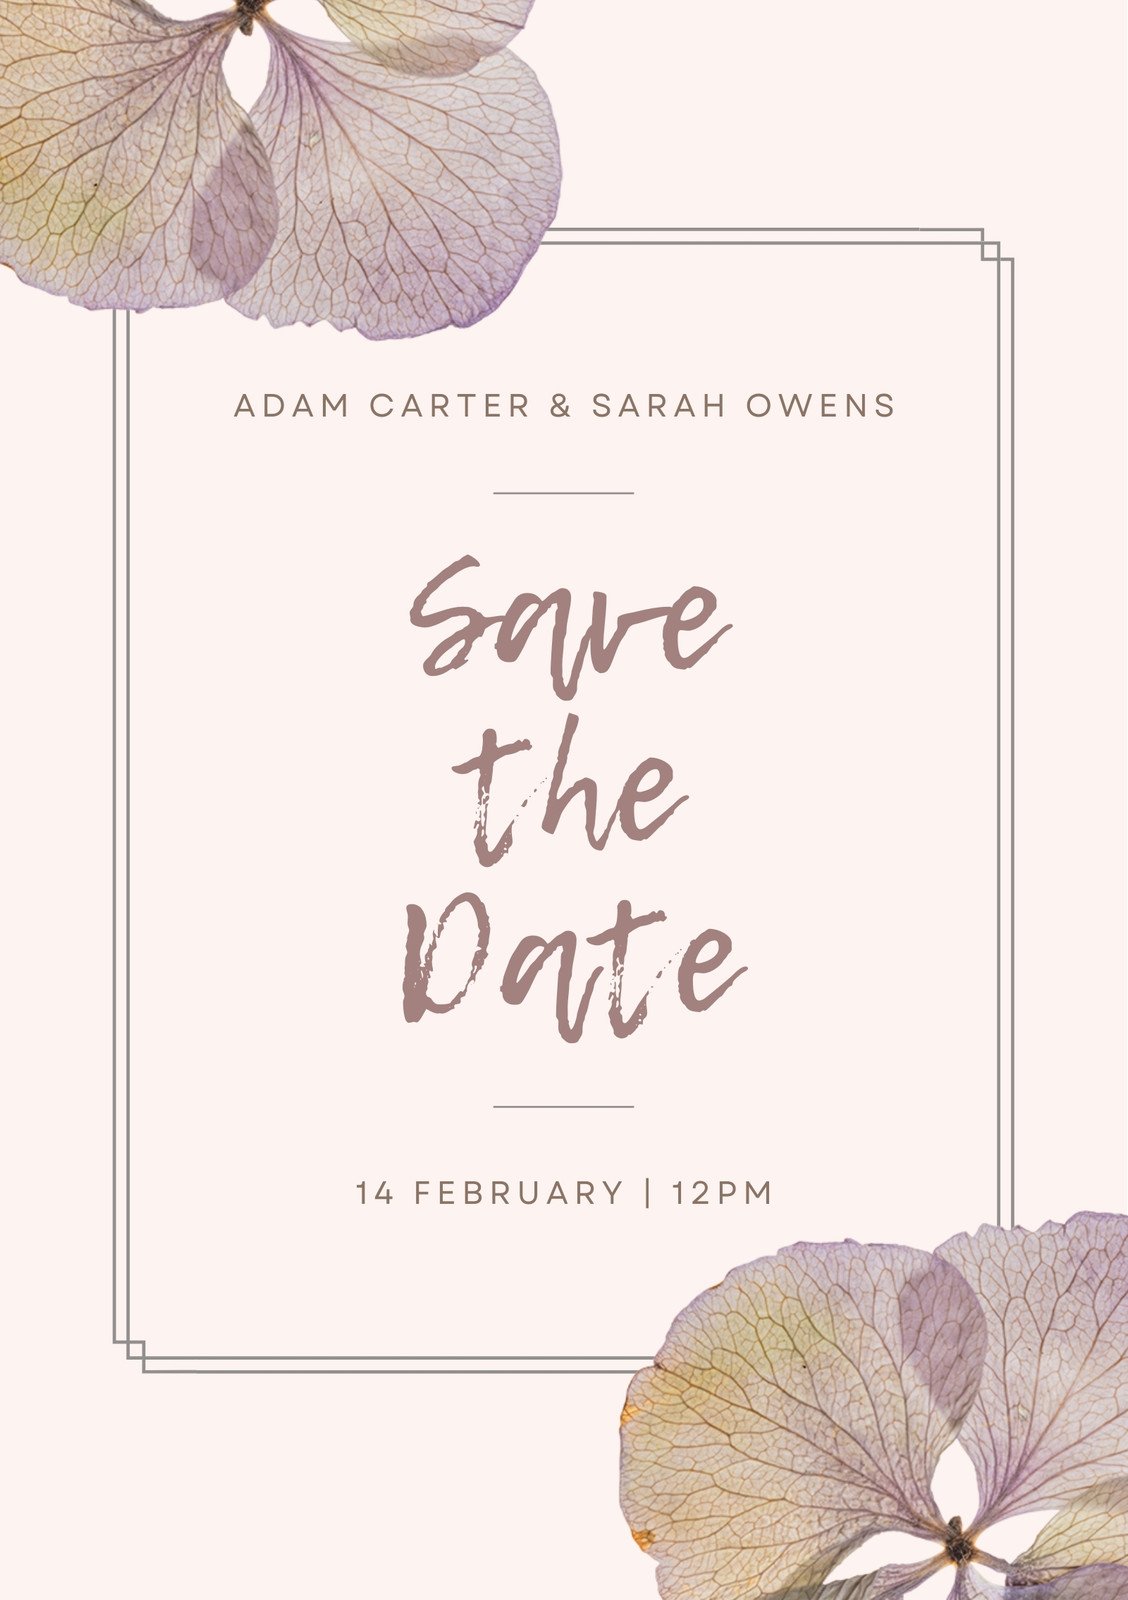 Free save the date card templates to edit and print | Canva